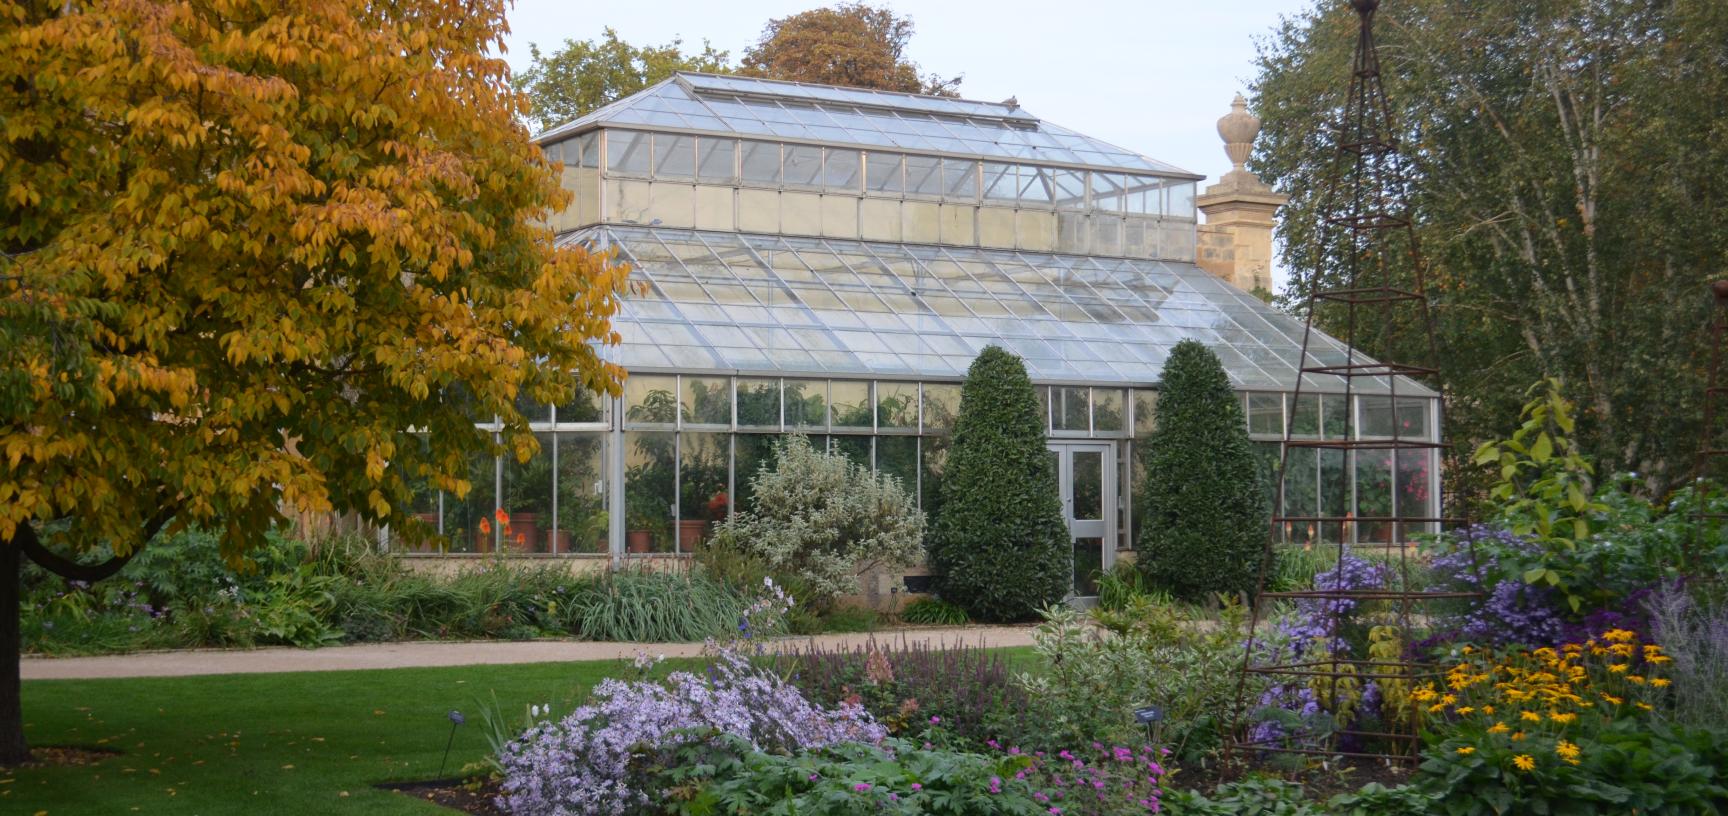 Conservatory in Autumn